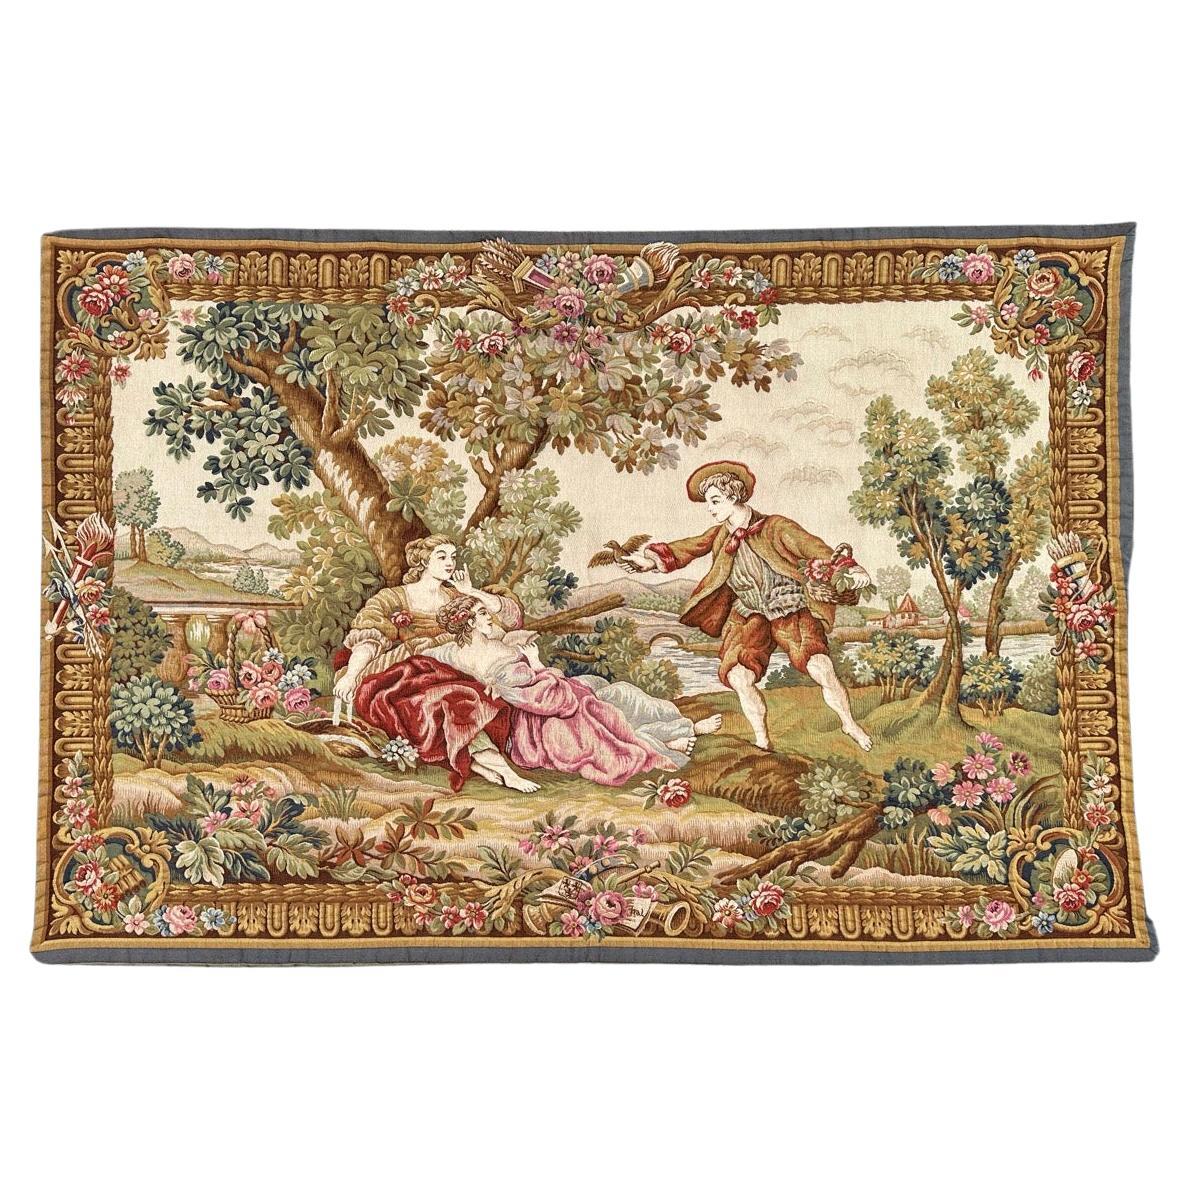 Bobyrug’s Nice Midcentury France Aubusson Style Jaquar Tapestry For Sale